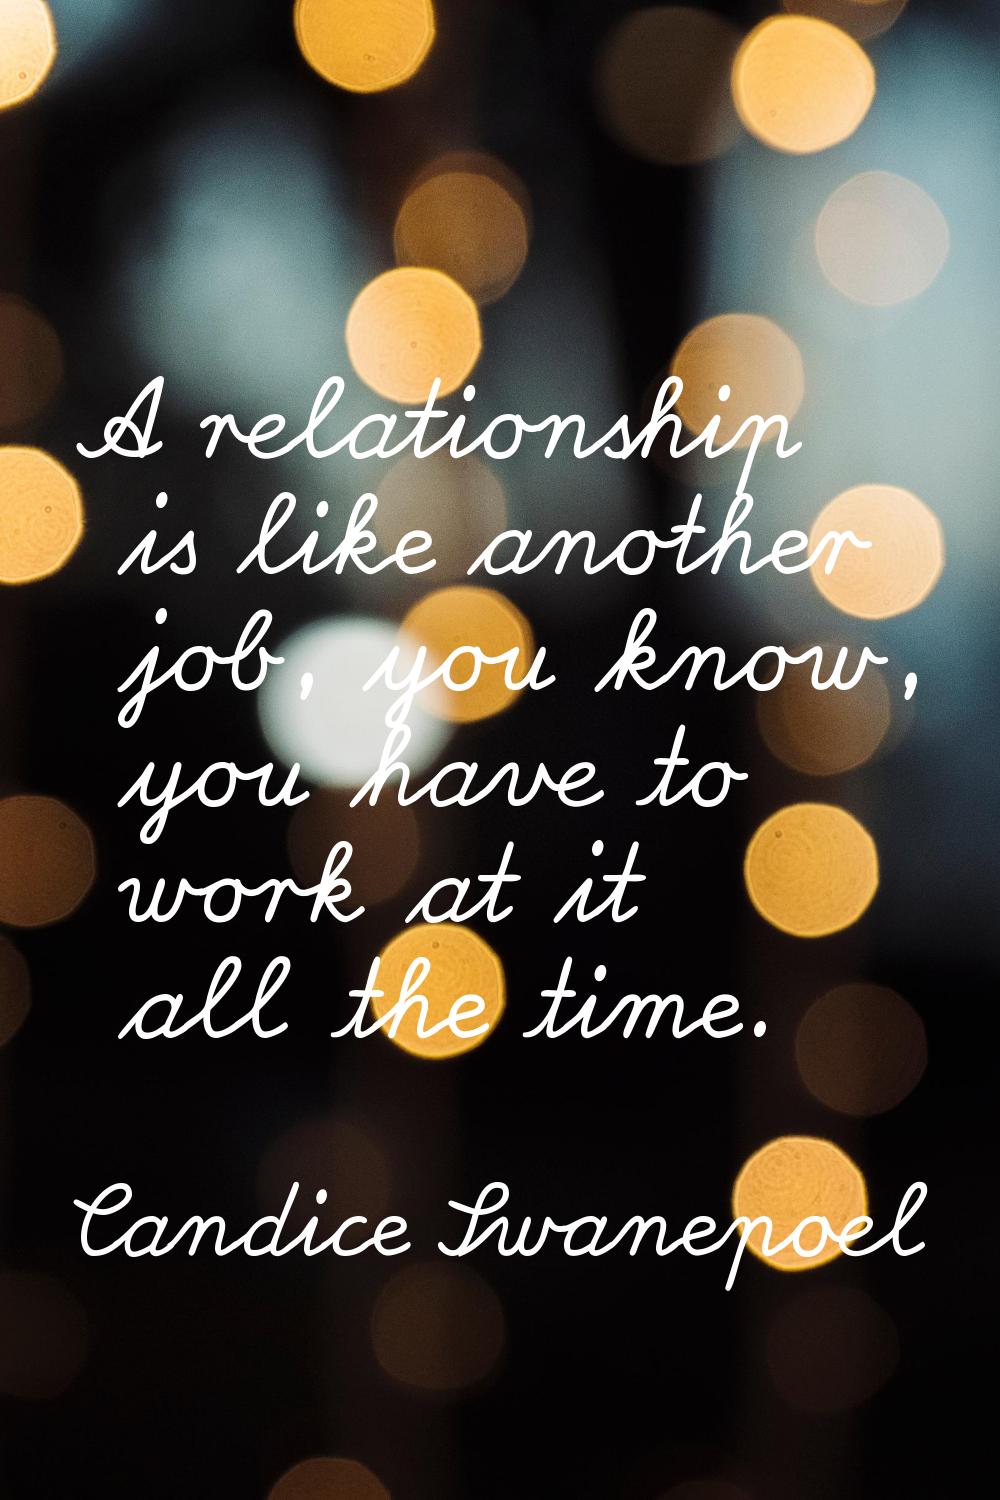 A relationship is like another job, you know, you have to work at it all the time.